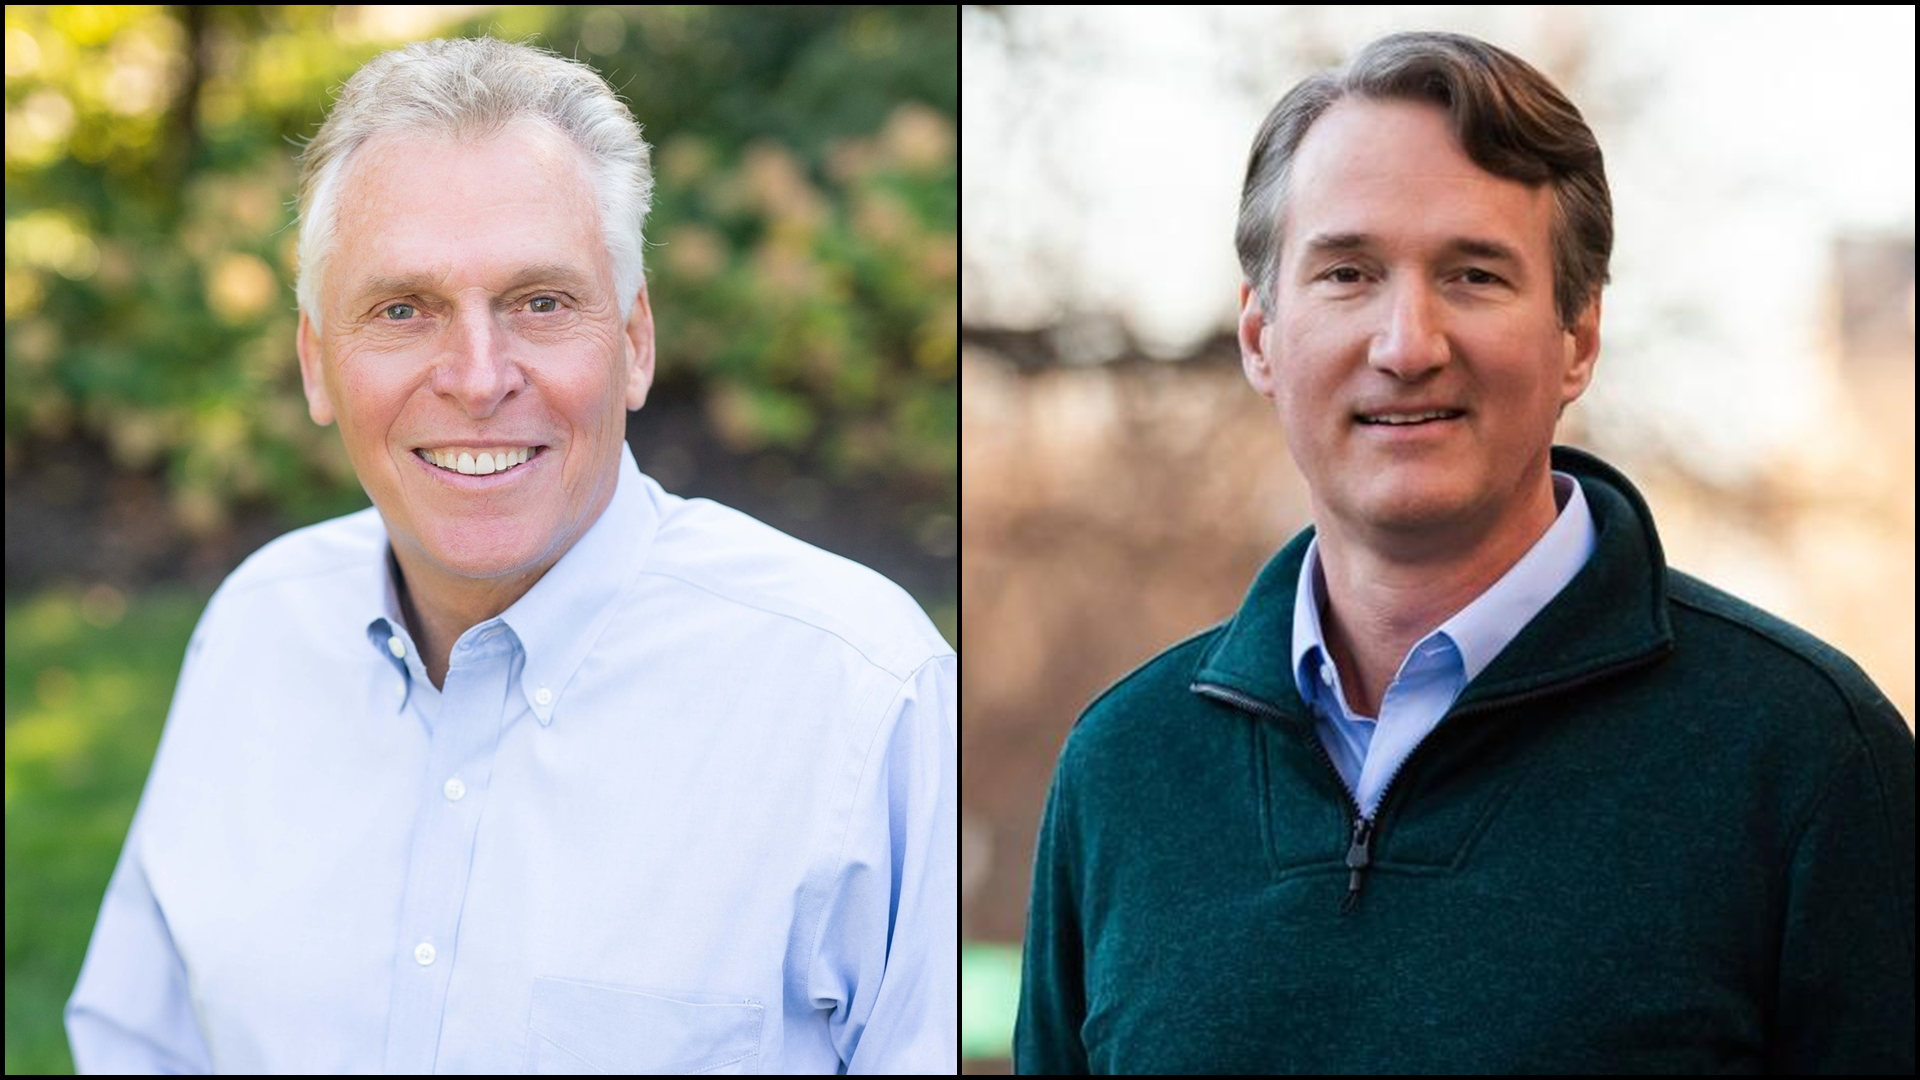 In the race to become the next governor of Virginia, 40% of likely voters would vote for Terry McAuliffe while 37% would vote for Glenn Youngkin, according to a new statewide poll conducted by the Wilder School at Virginia Commonwealth University.